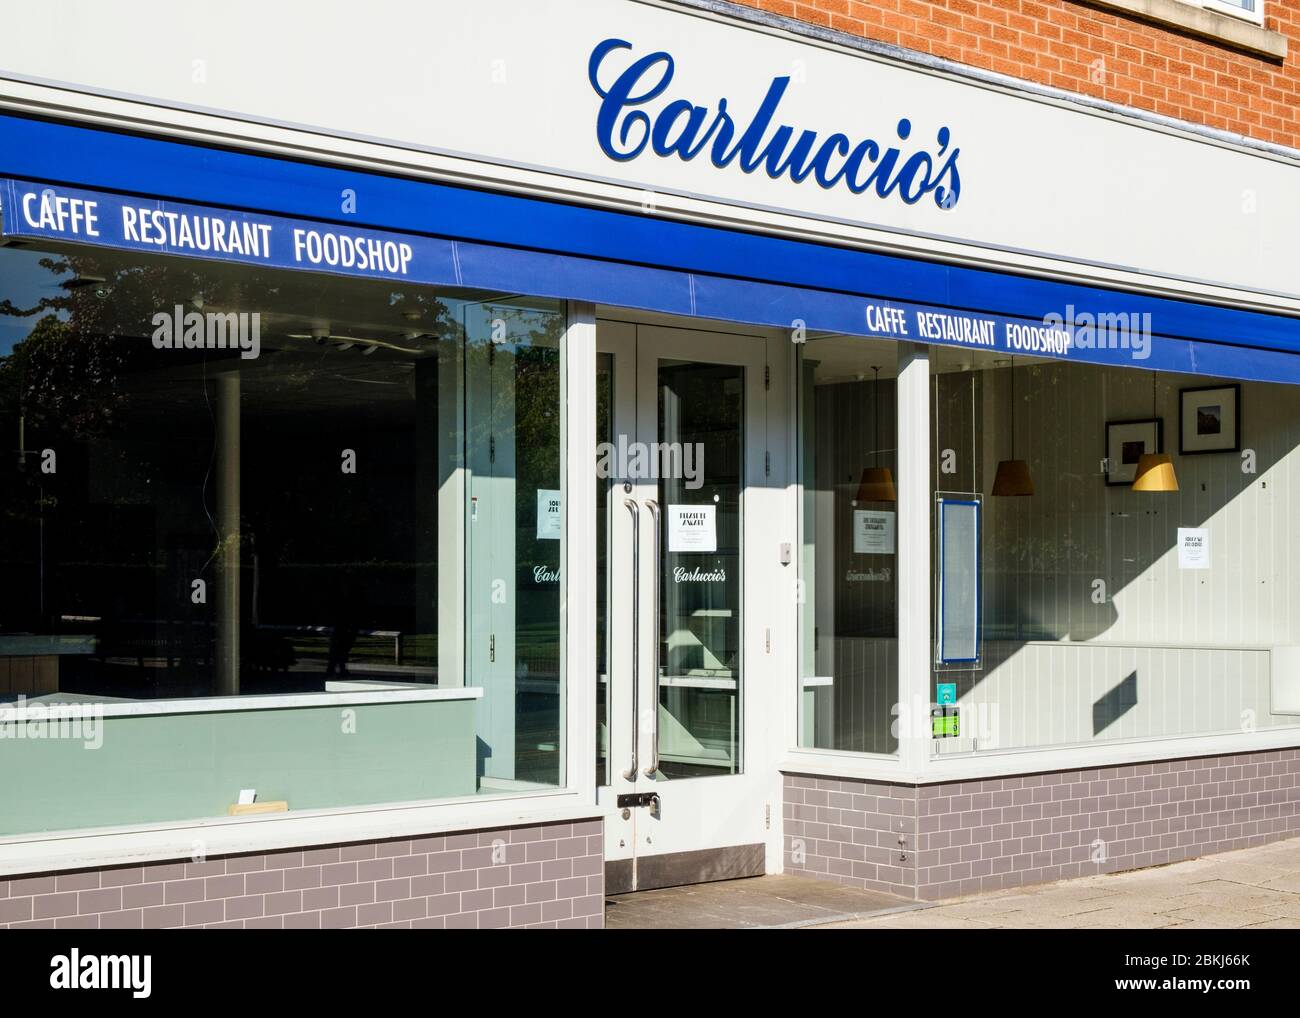 Carluccio's restaurant, West Bridgford, Nottinghamshire, UK. The business went into administration after closing due to the Covid-19 pandemic. Stock Photo